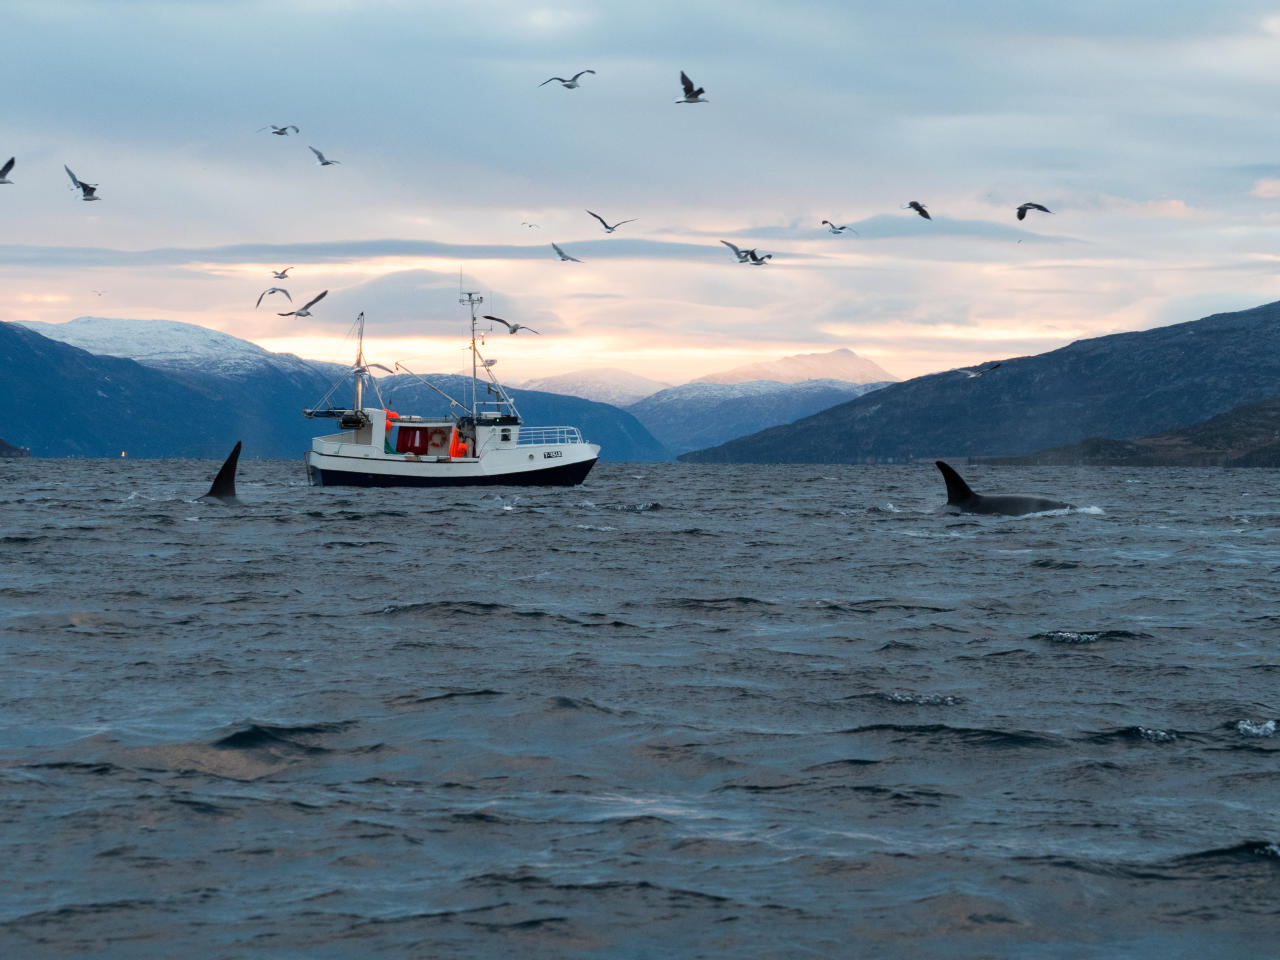 Orcas and humans sharing the rich fjords